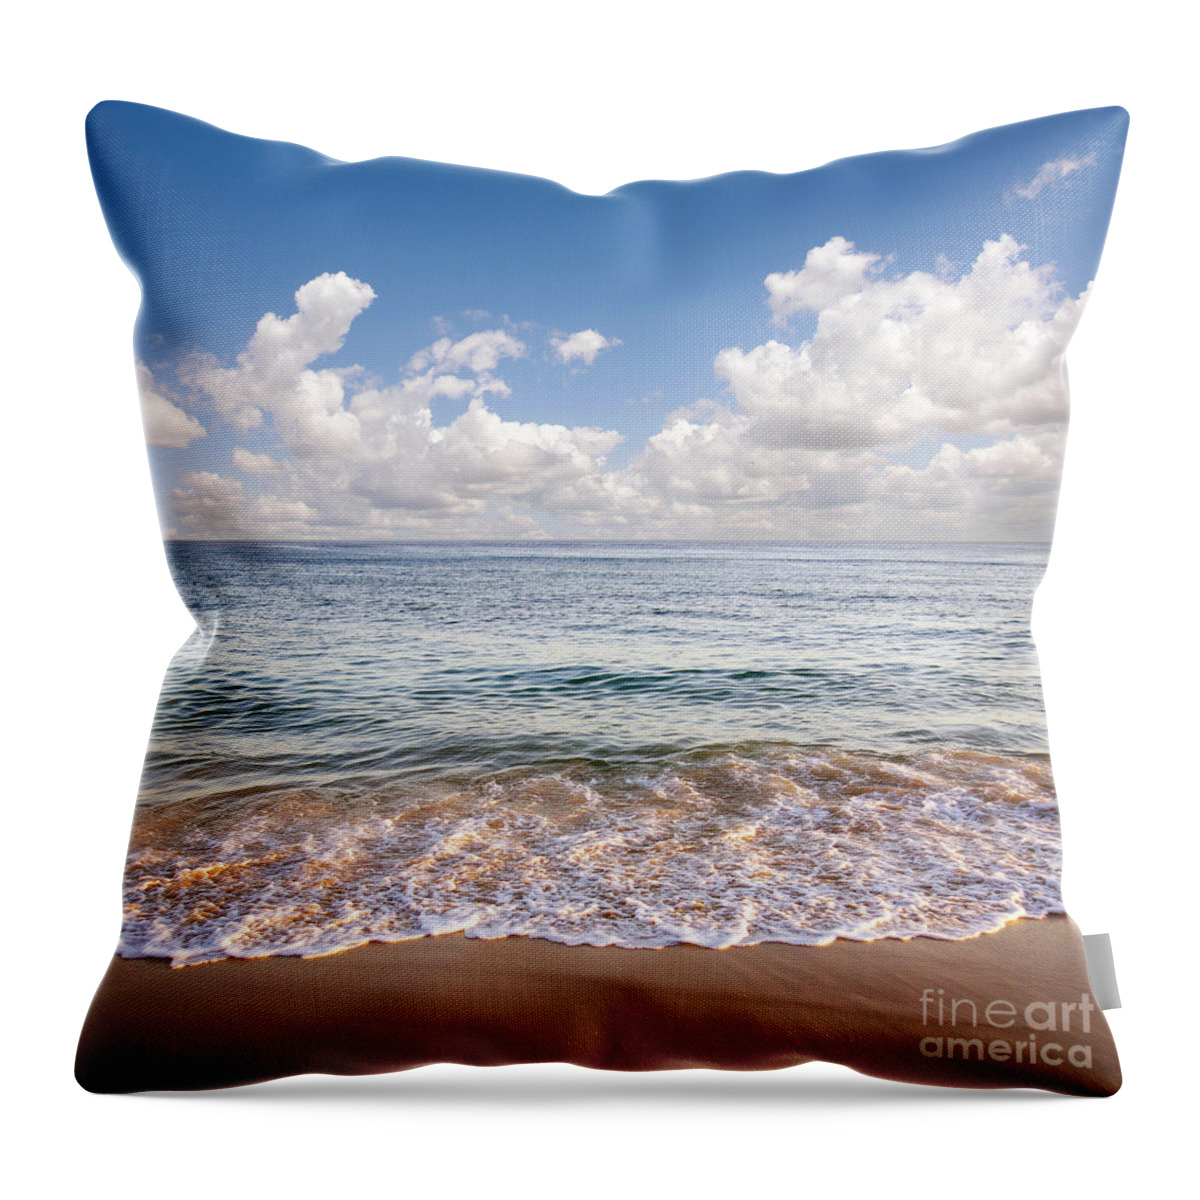 Background Throw Pillow featuring the photograph Seascape by Carlos Caetano